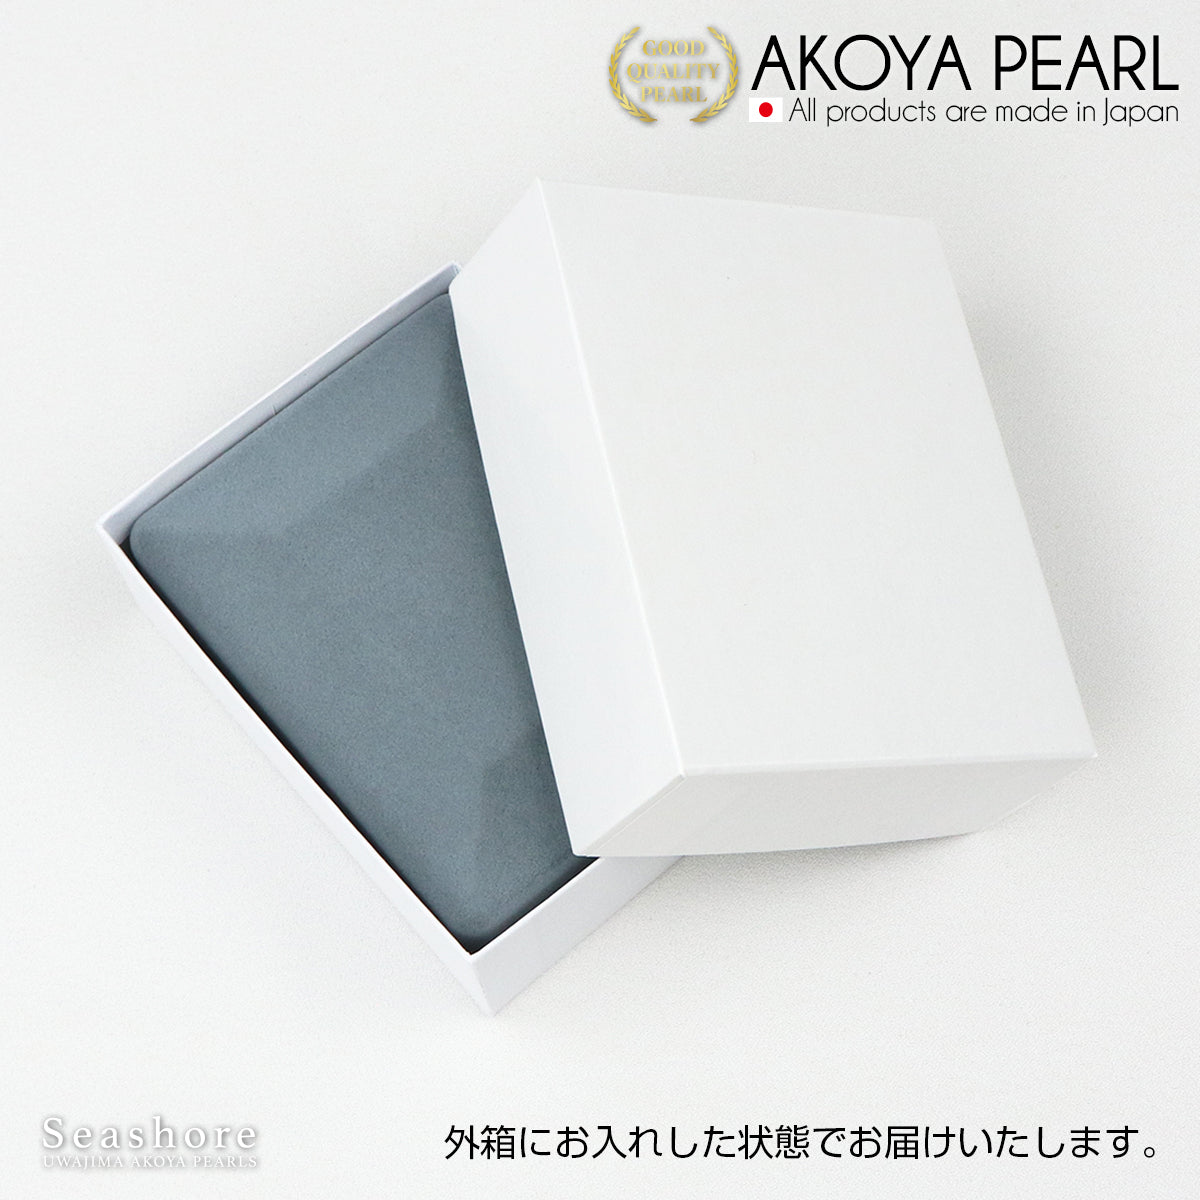 Brooch case compact velor-like fabric pearl case gray (1.0.745.8)